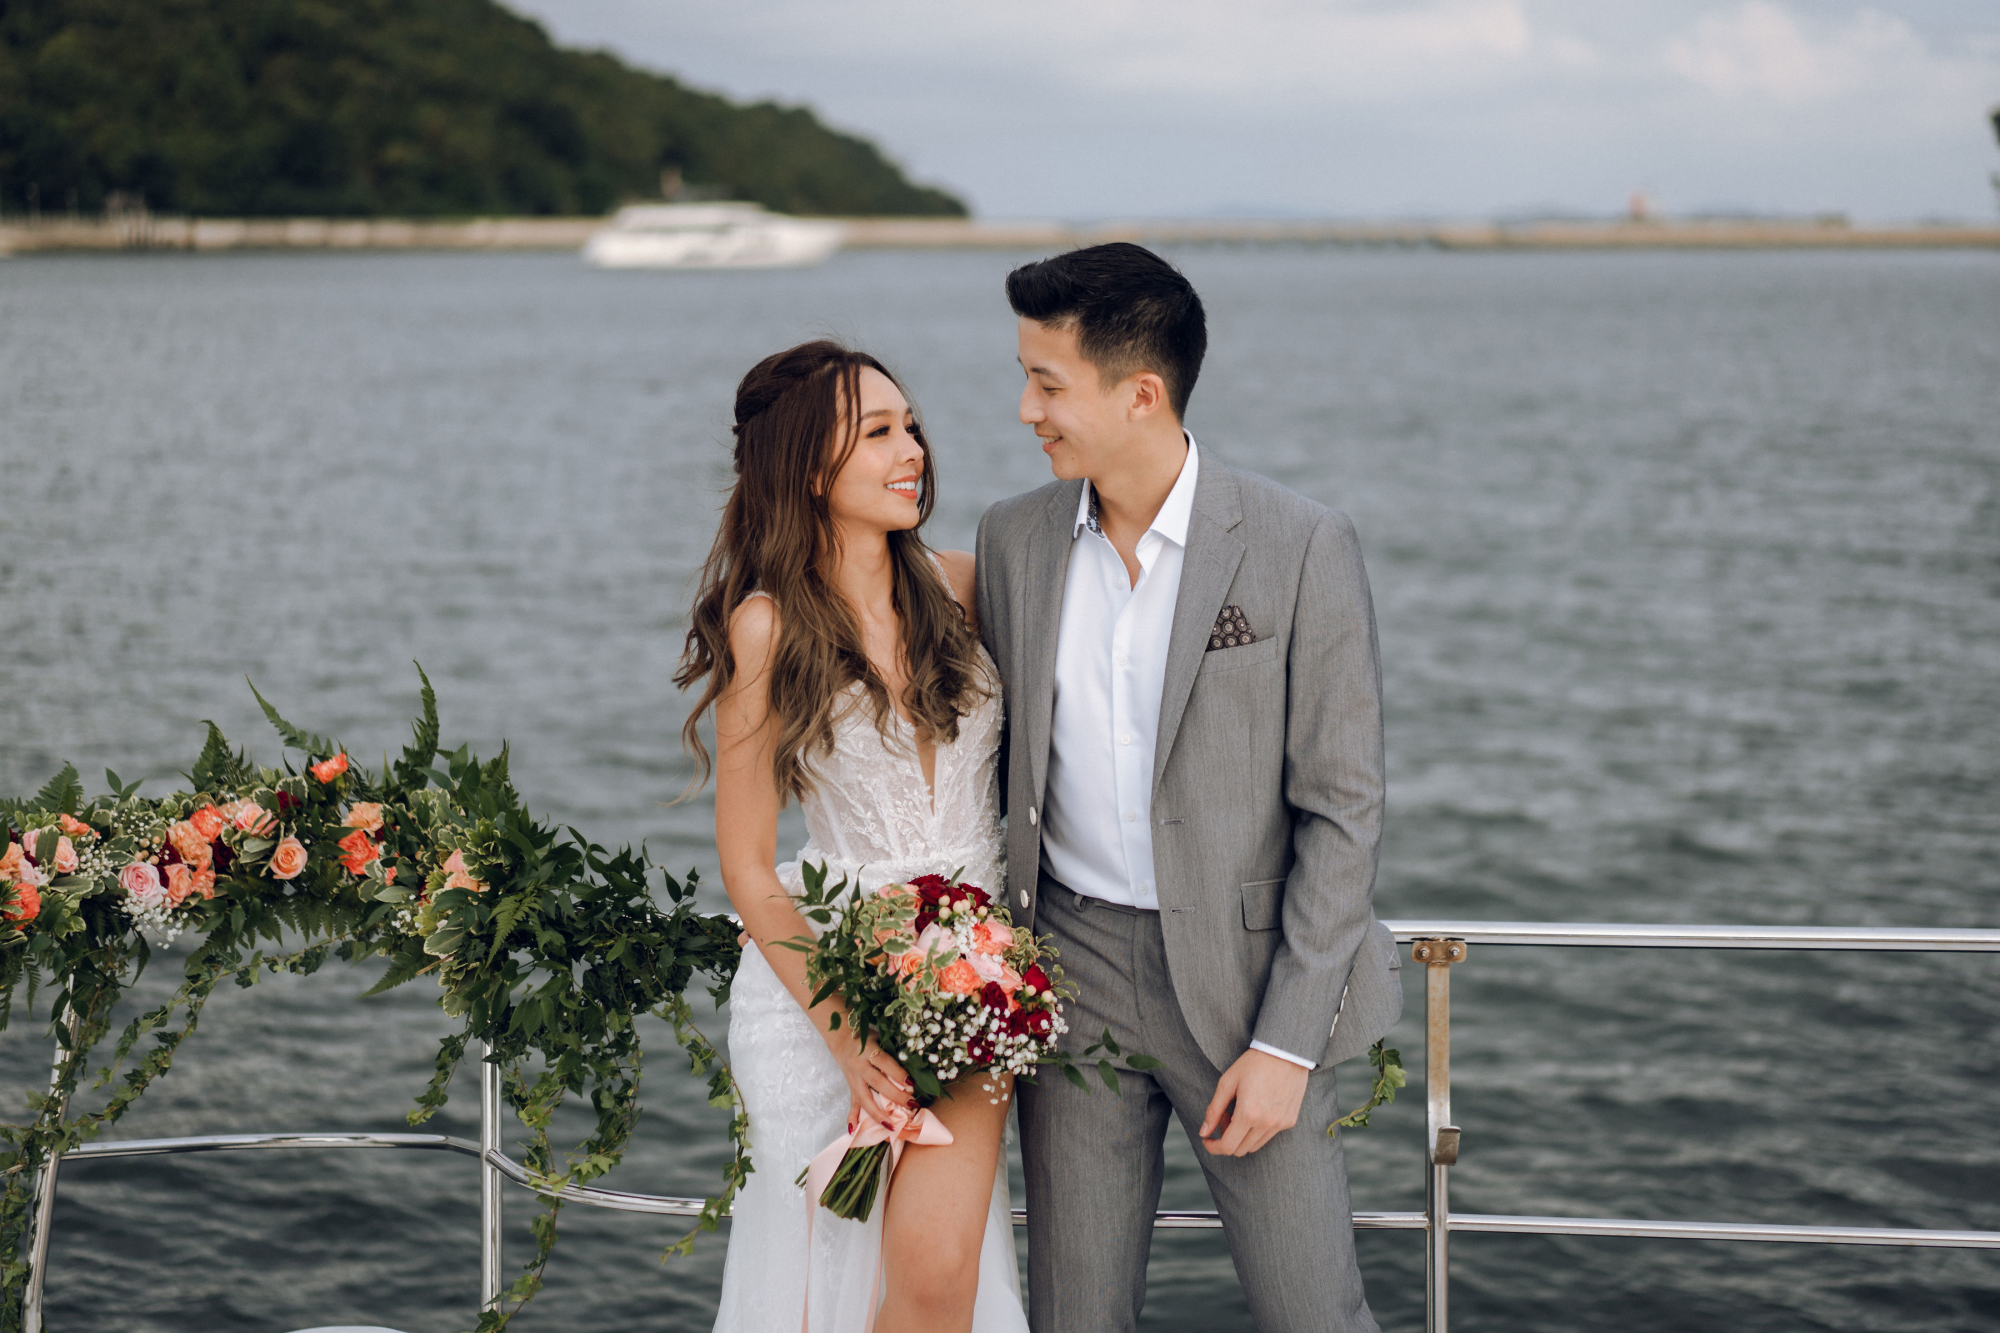 Sunset Prewedding Photoshoot On A Yacht With Romantic Floral Styling by Samantha on OneThreeOneFour 15